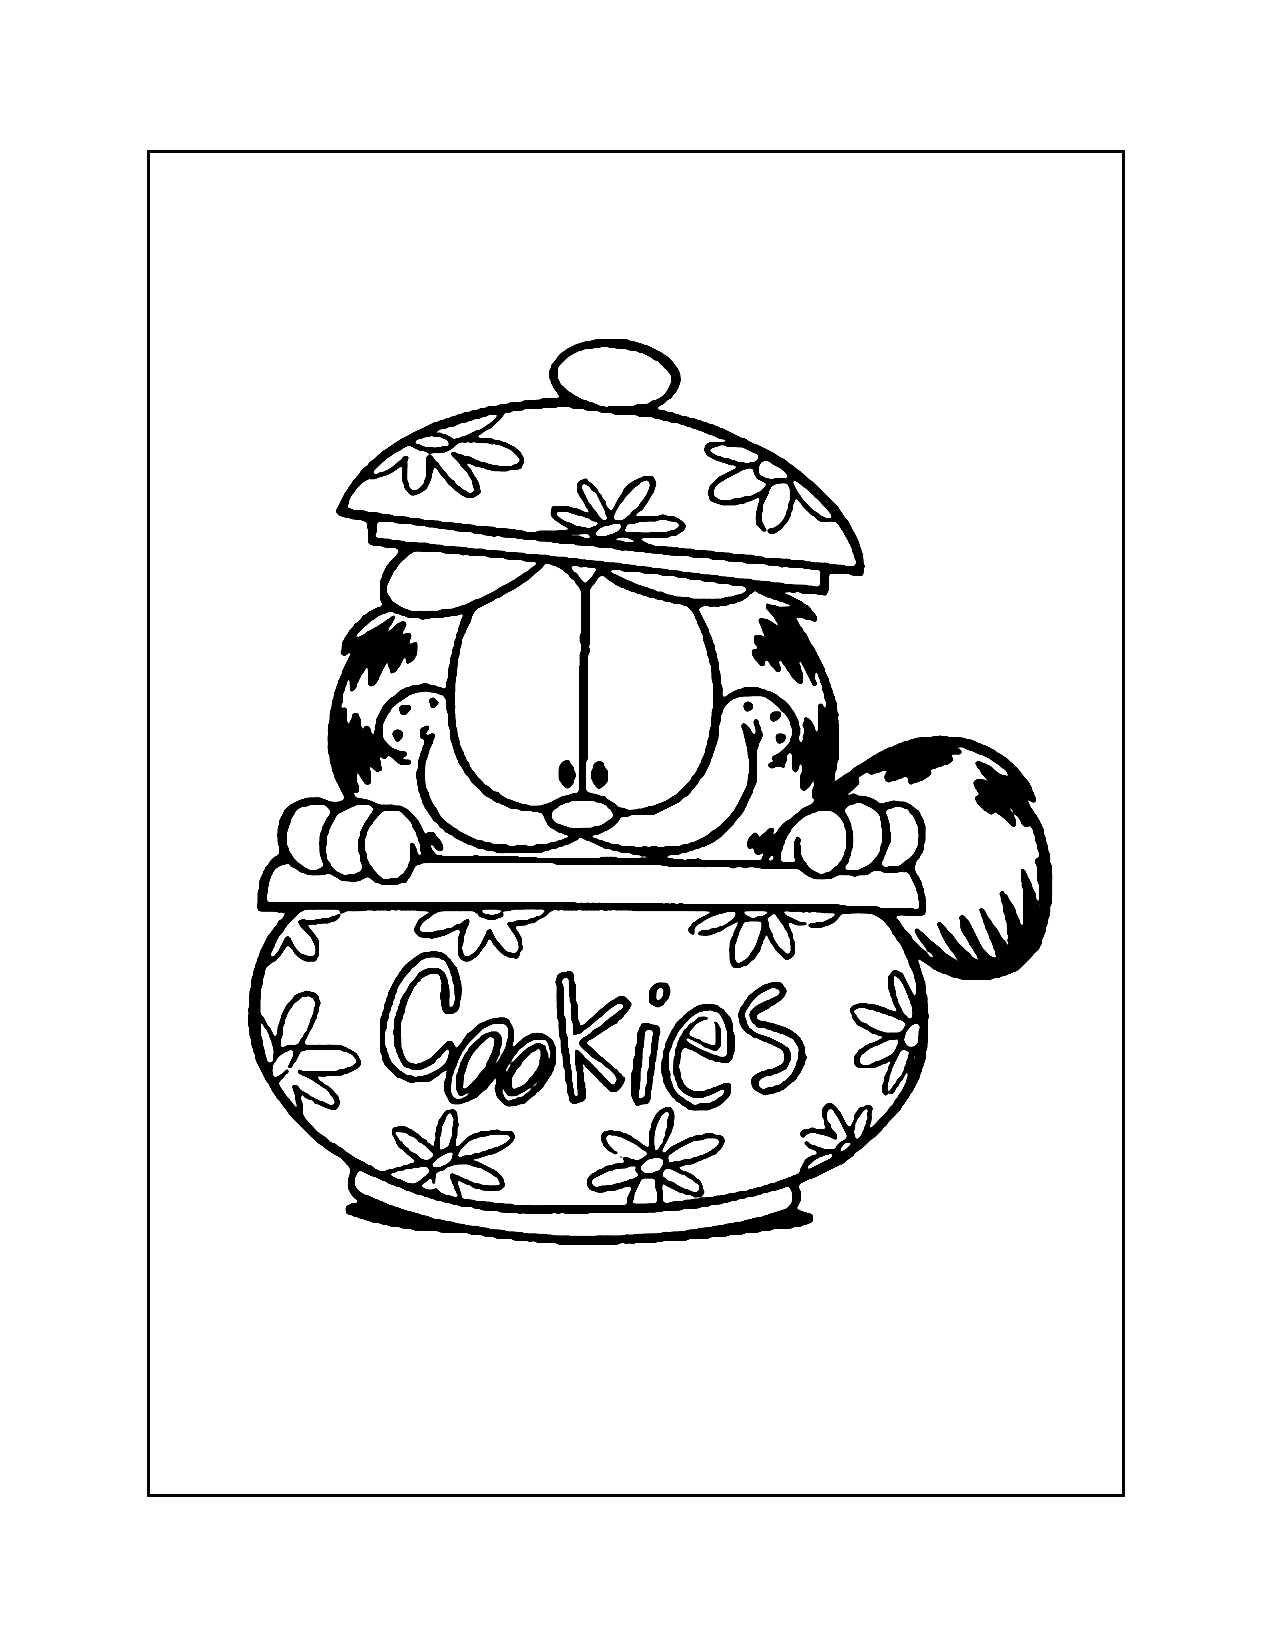 Garfield In The Cookie Jar Coloring Page